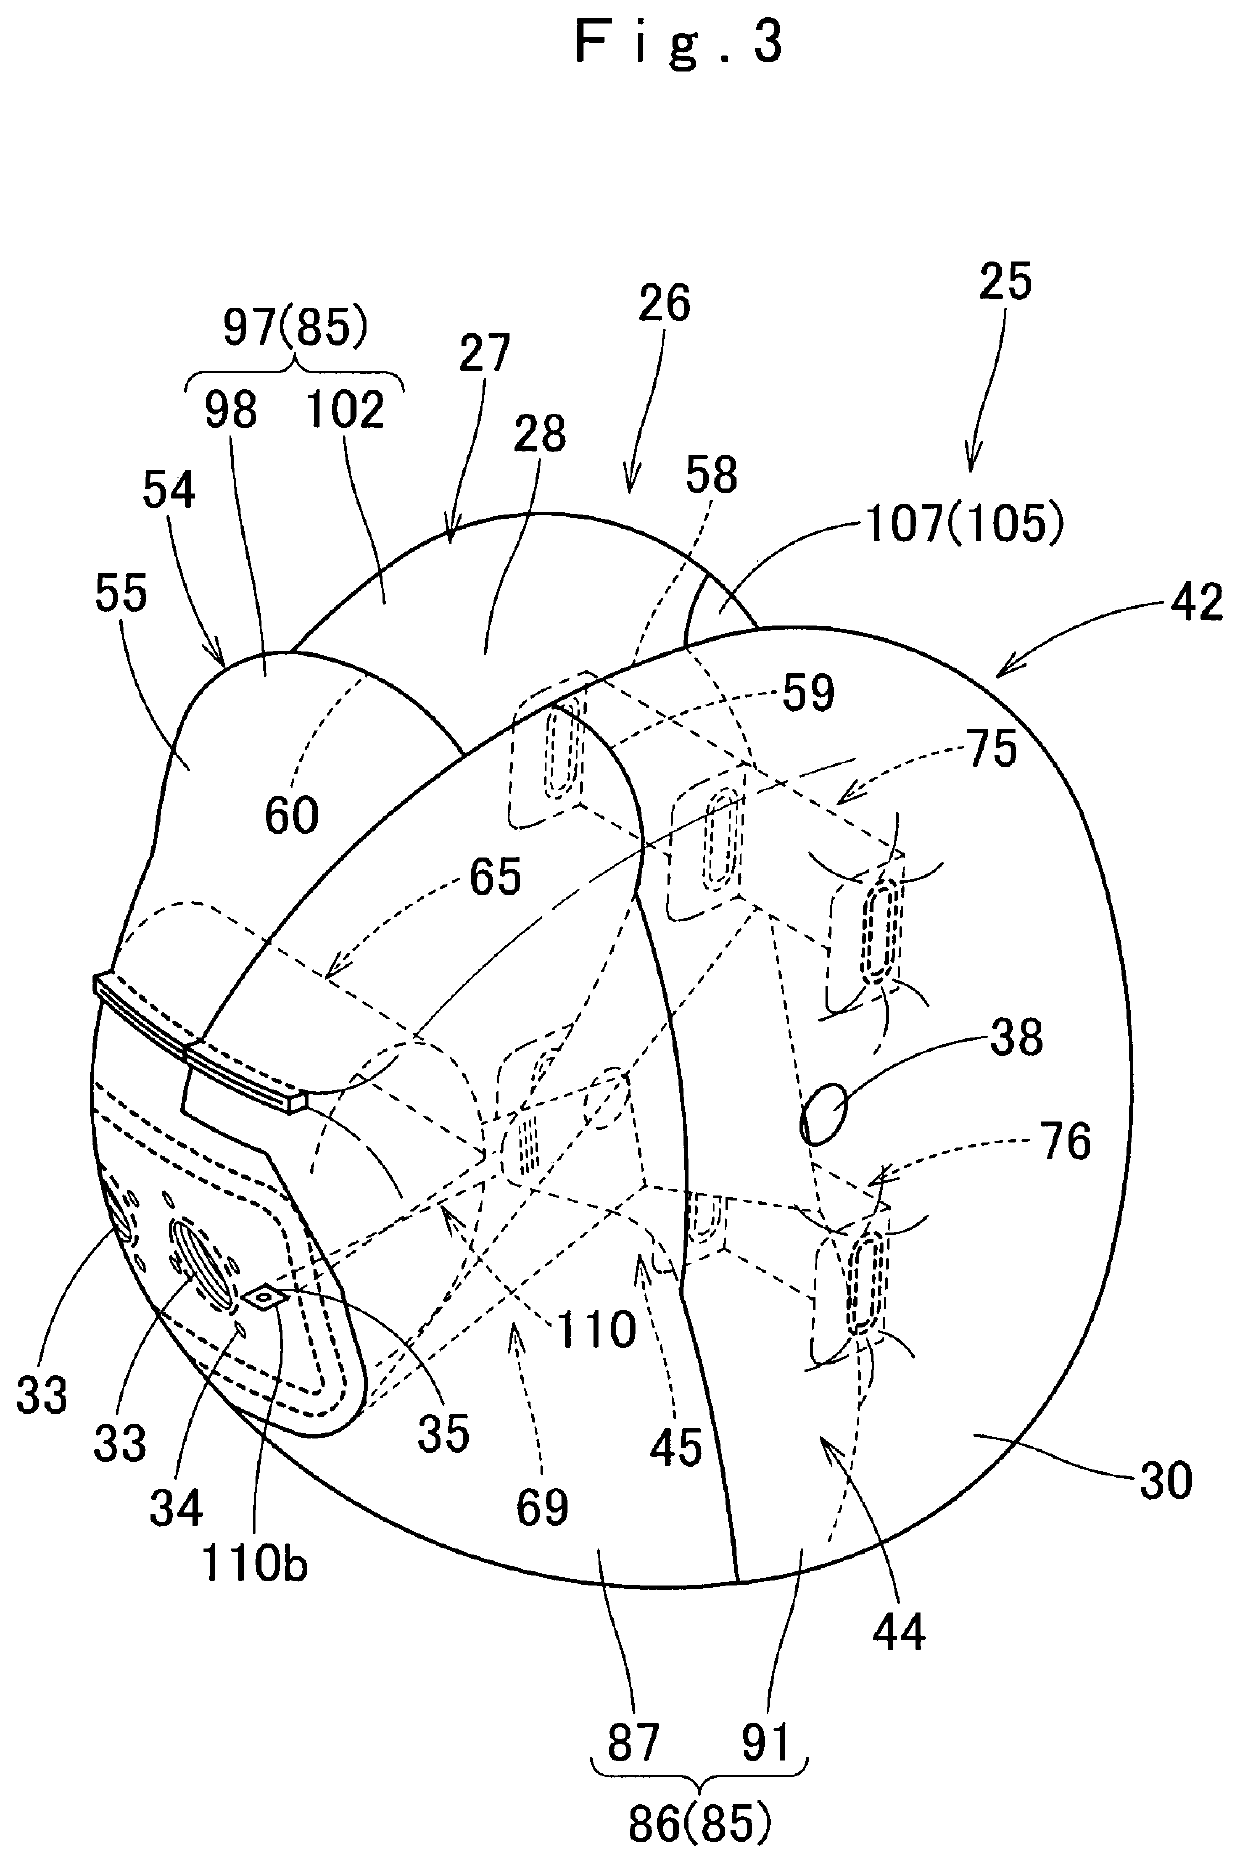 Airbag device with exhaust hole